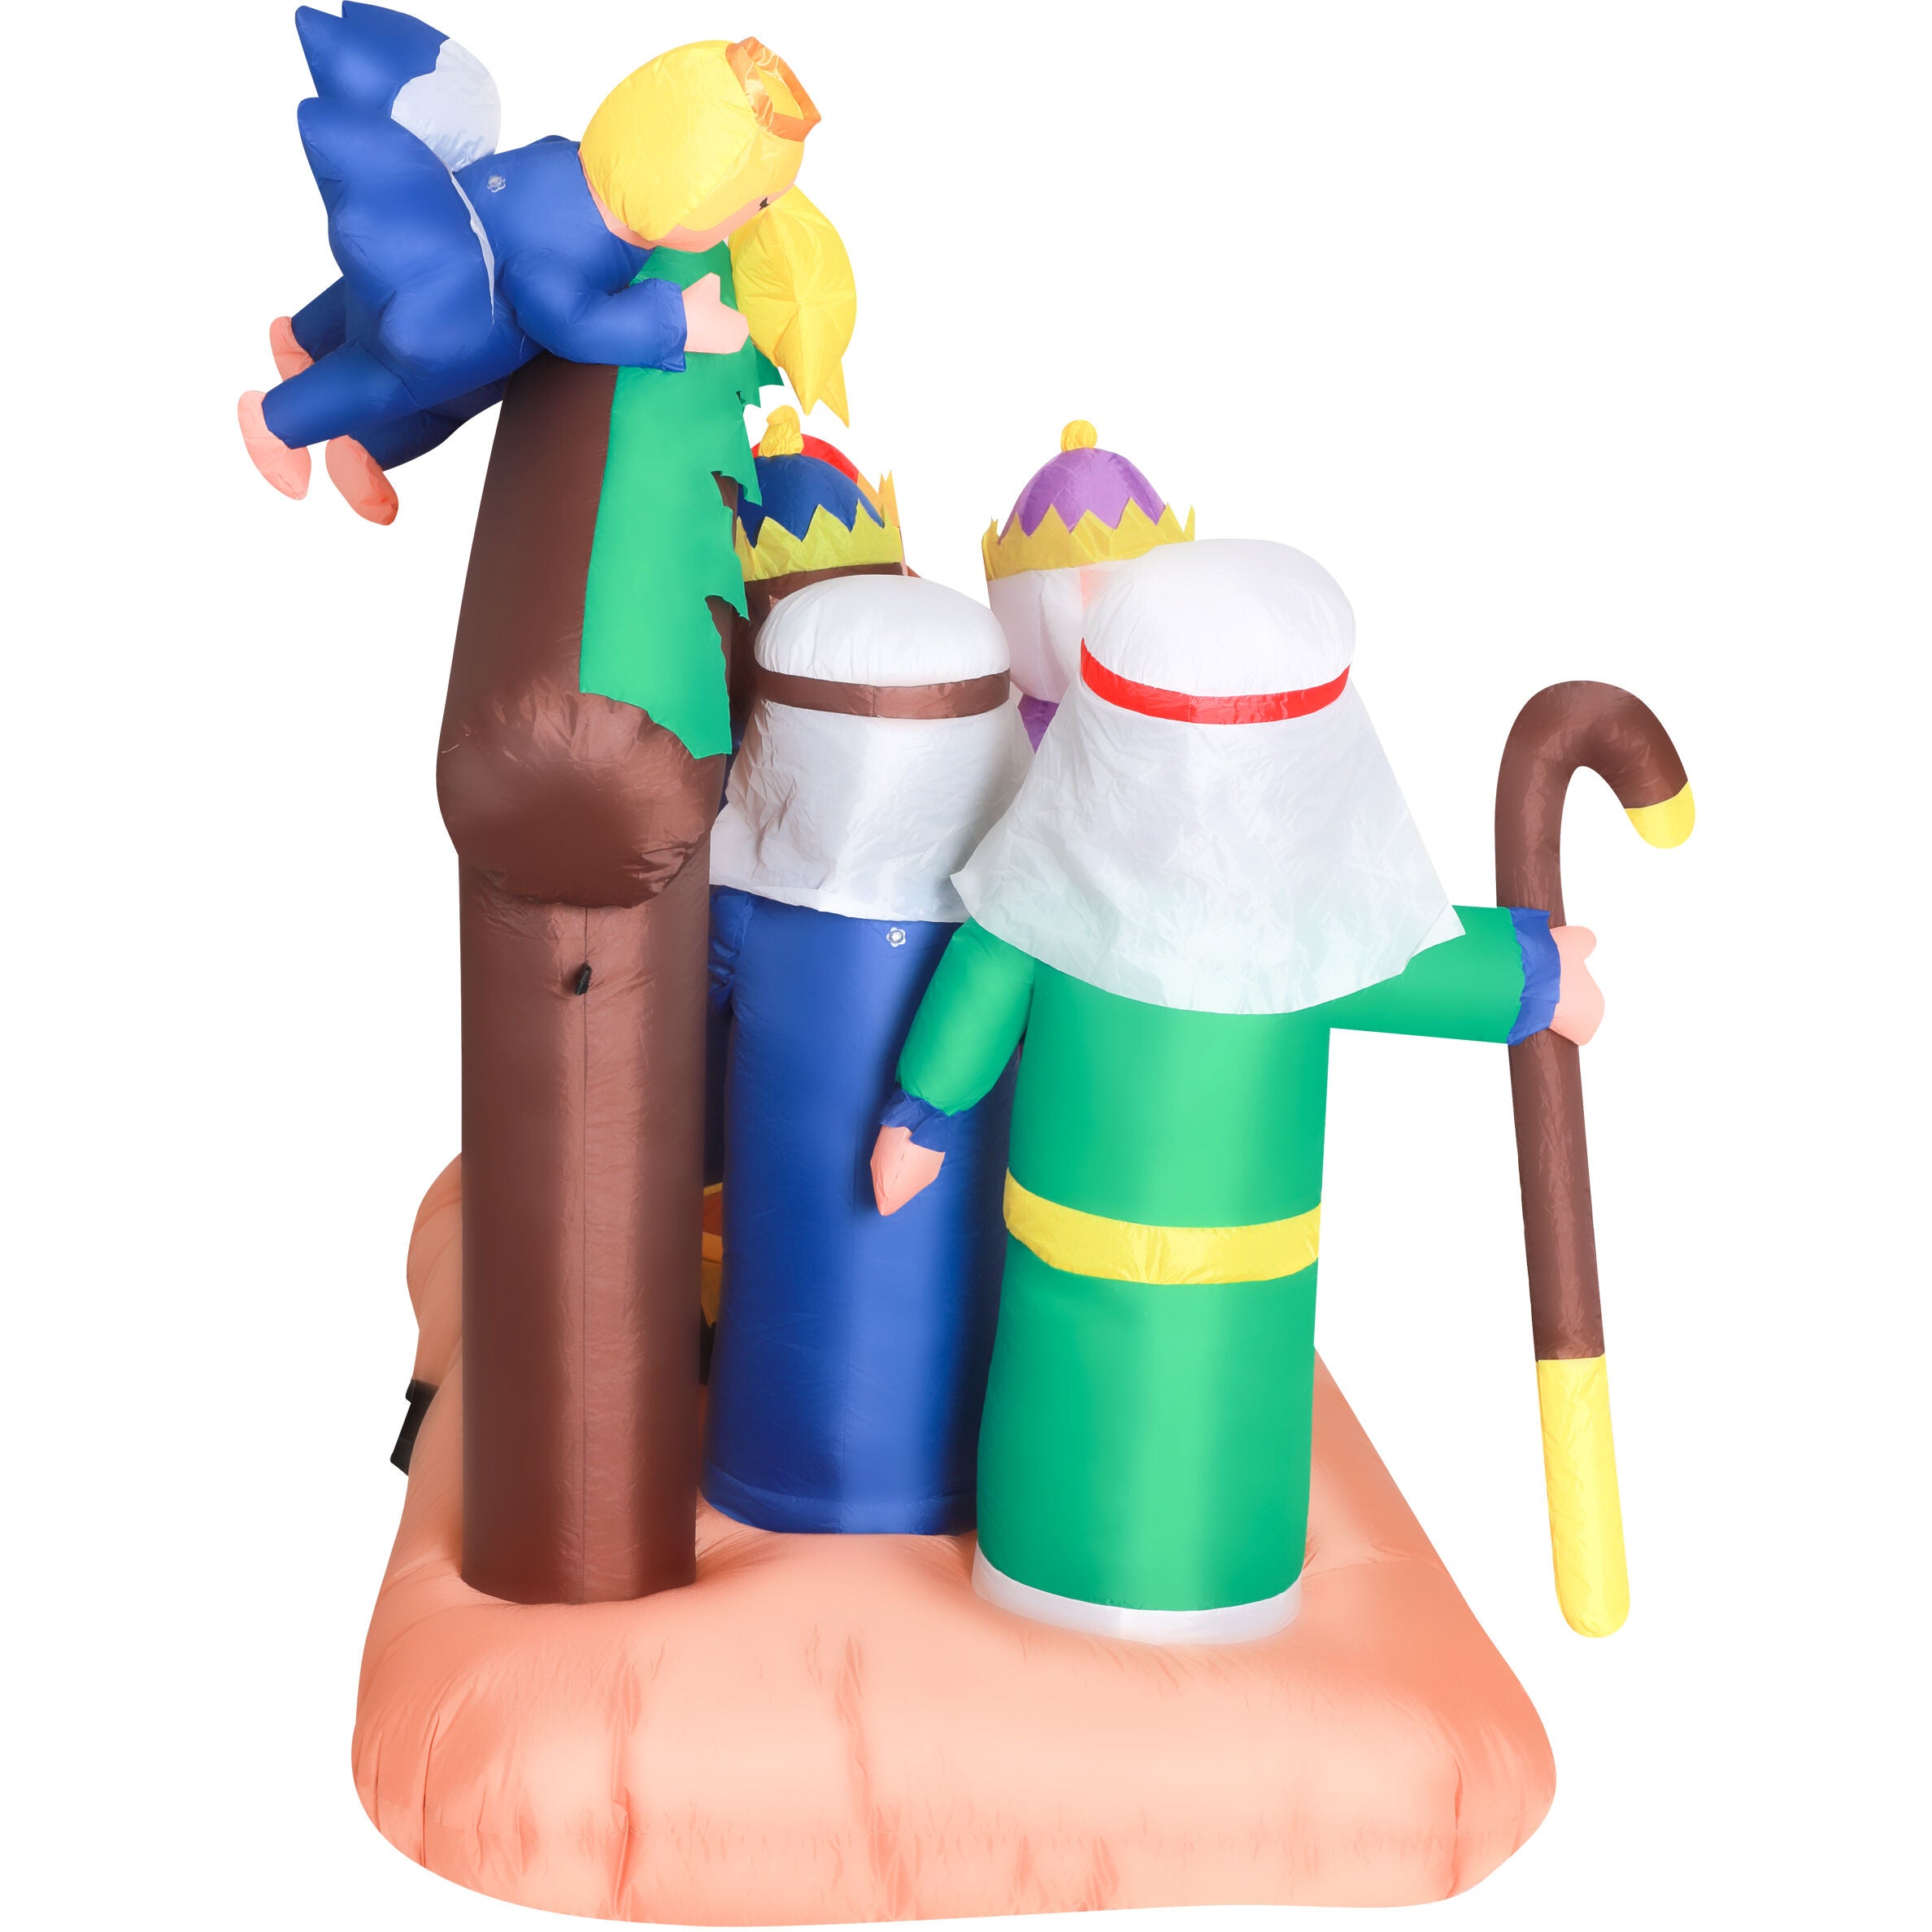 Fraser Hill Farm -  5-Ft. Pre-Lit Inflatable Nativity Scene with 3 Wisemen Presenting Gifts